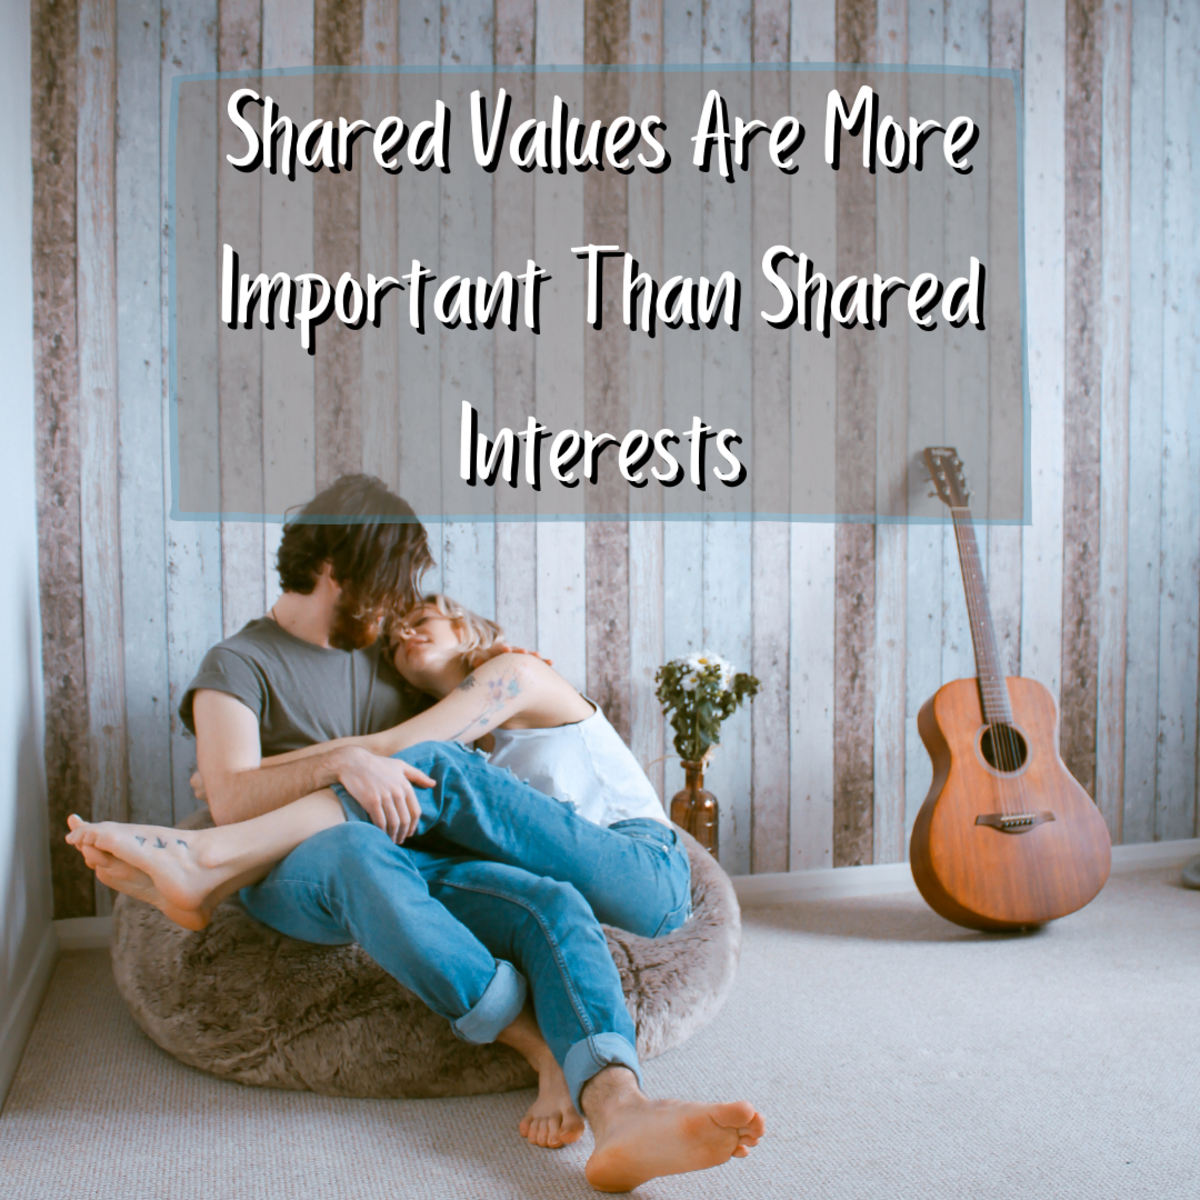 What is more important for lasting relationships? Shared interests or shared values? It turns out that, in the long run, values are profoundly important. Read on to find out why.